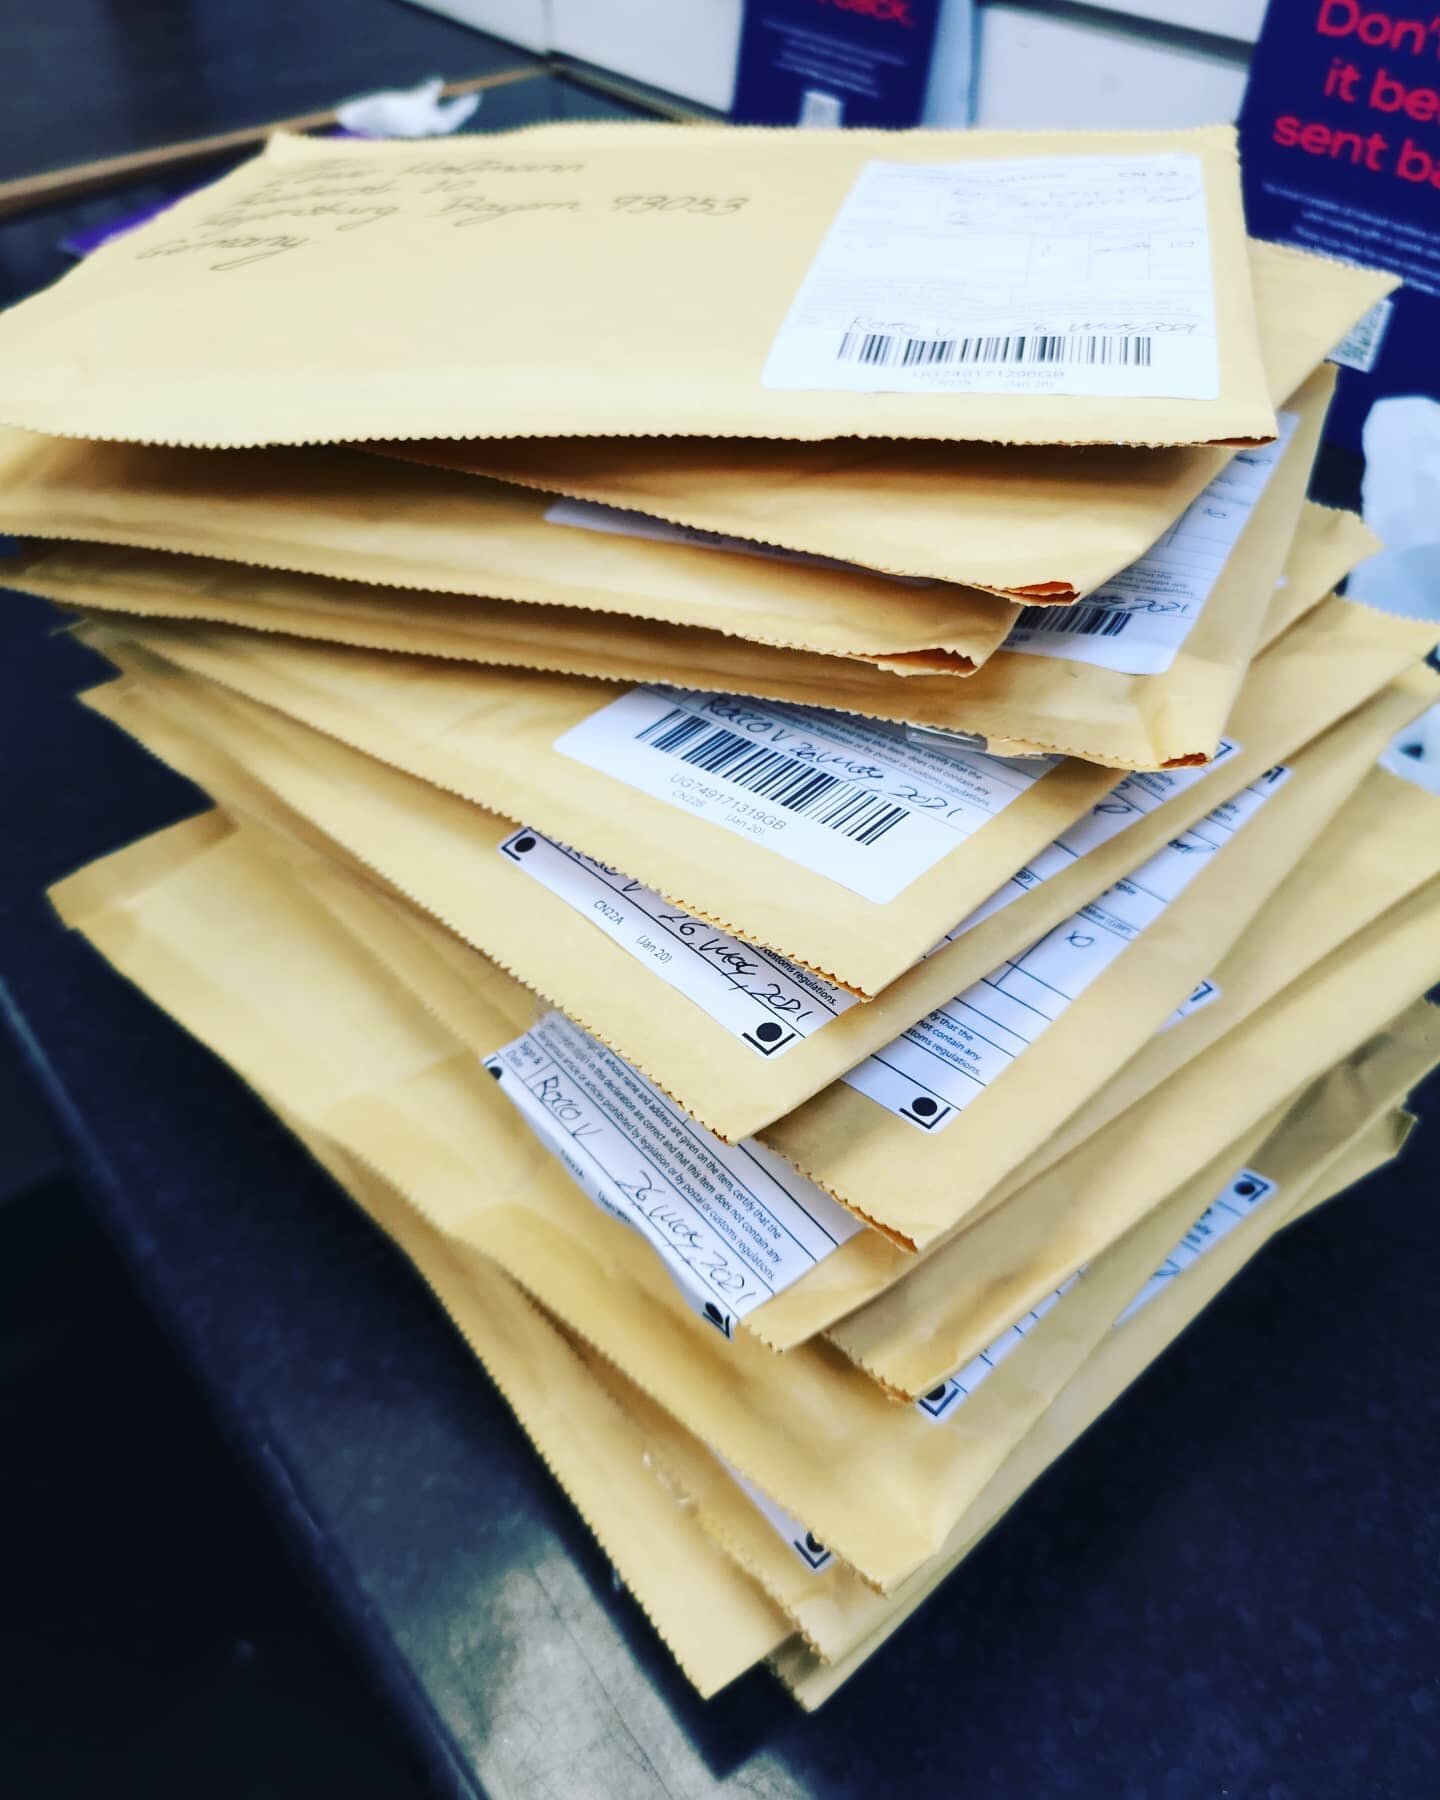 &quot;Next batch of Roxville CDs heading out around the world!
Thanks to everyone for their support so far - we really appreciate it. If you haven't got yours yet, get it here 😉&quot;

Roxvilleband.com